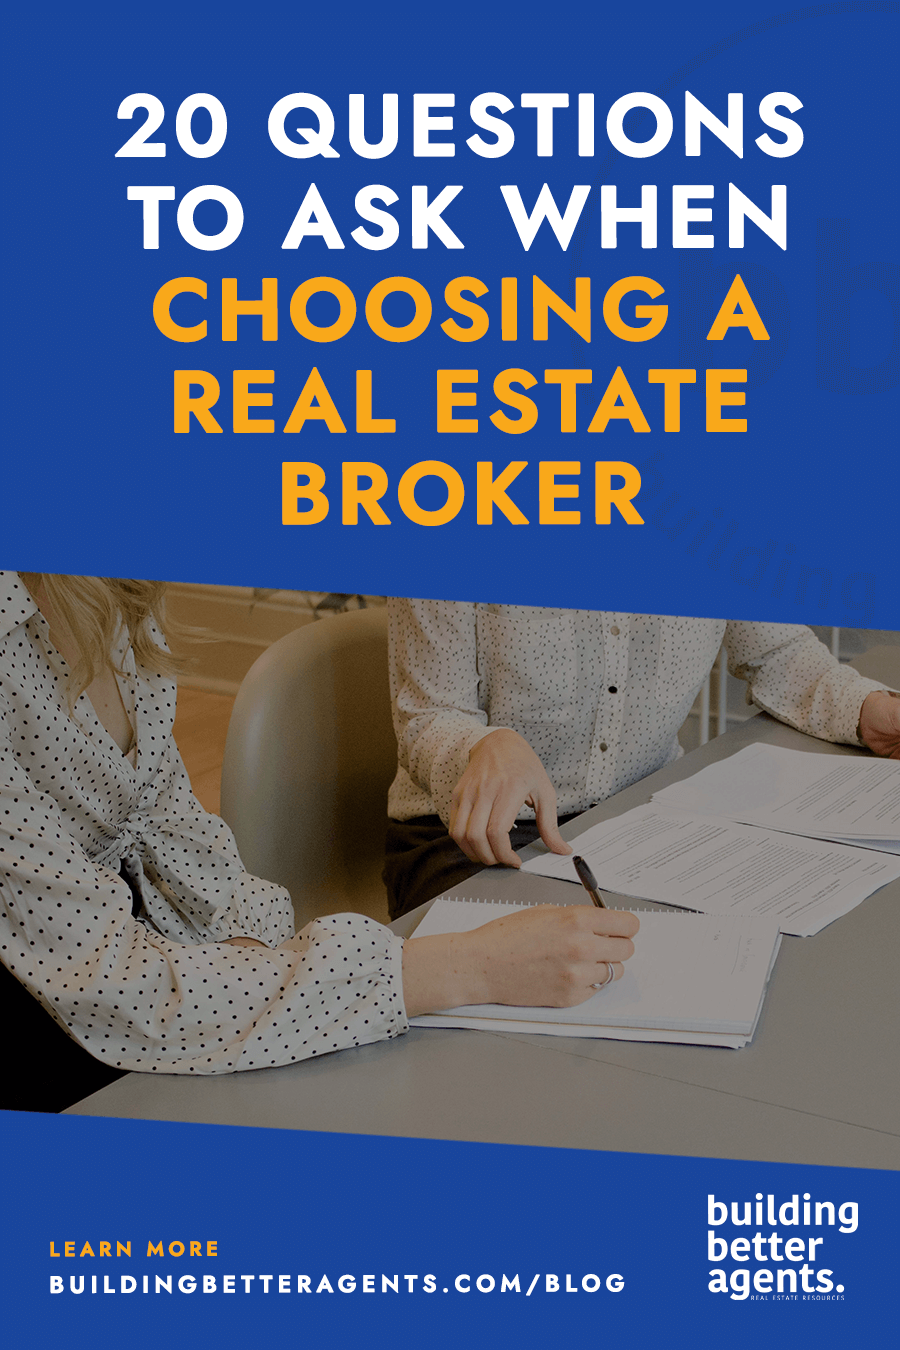 20 Questions to Ask When Choosing a Real Estate Broker